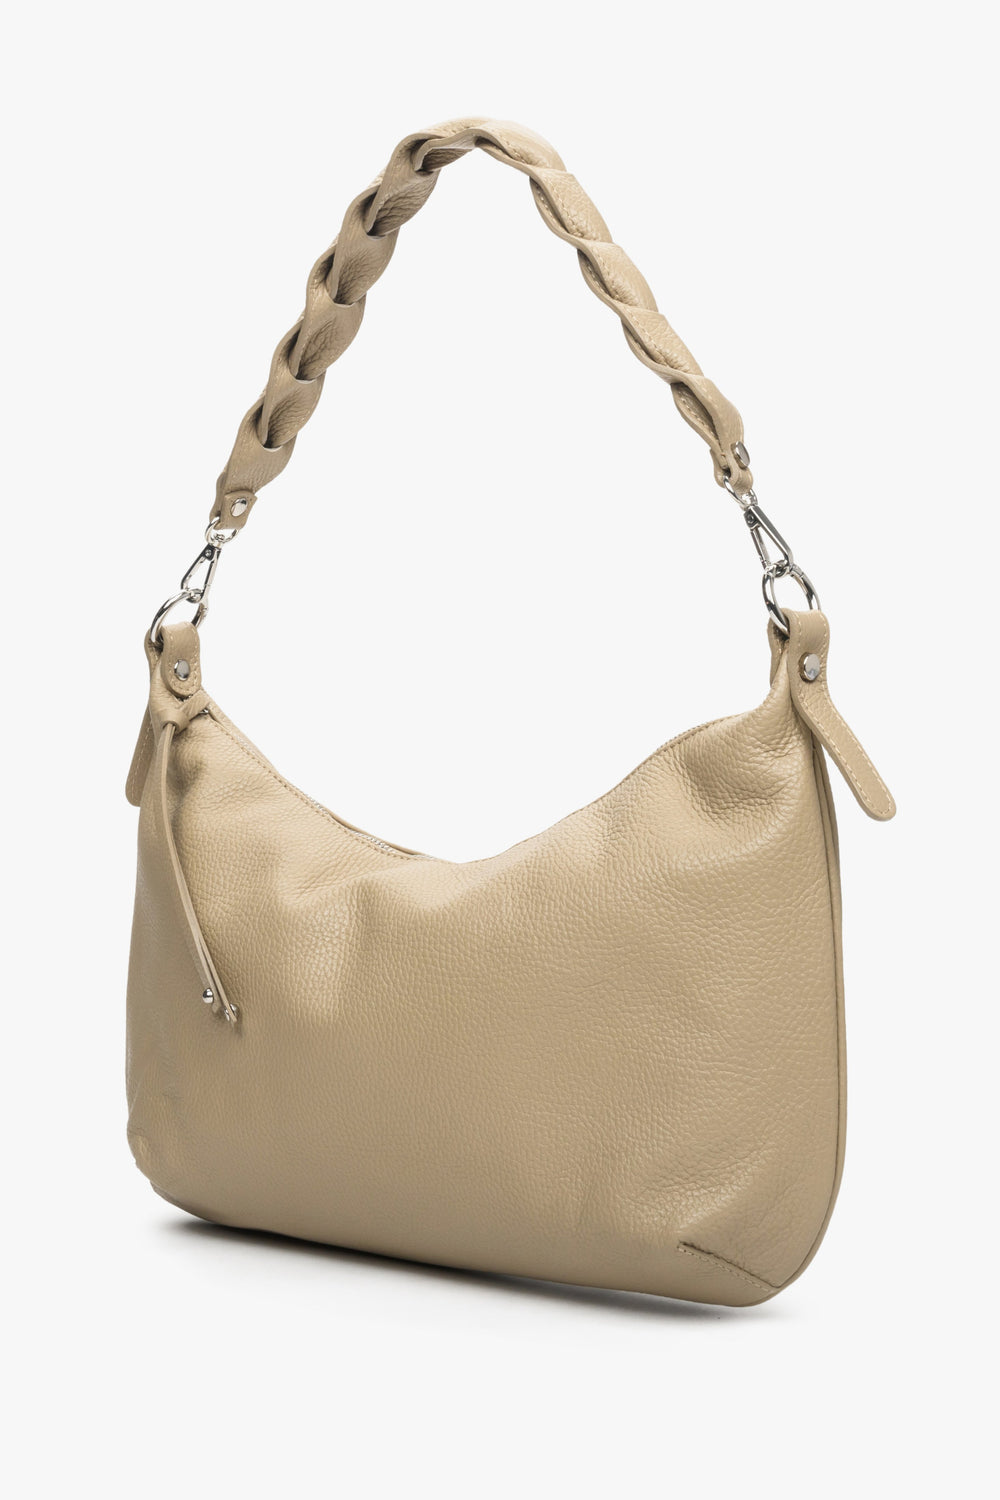 Small Sand Beige Leather Women's Shoulder Bag Made in Italy Estro ER00113003